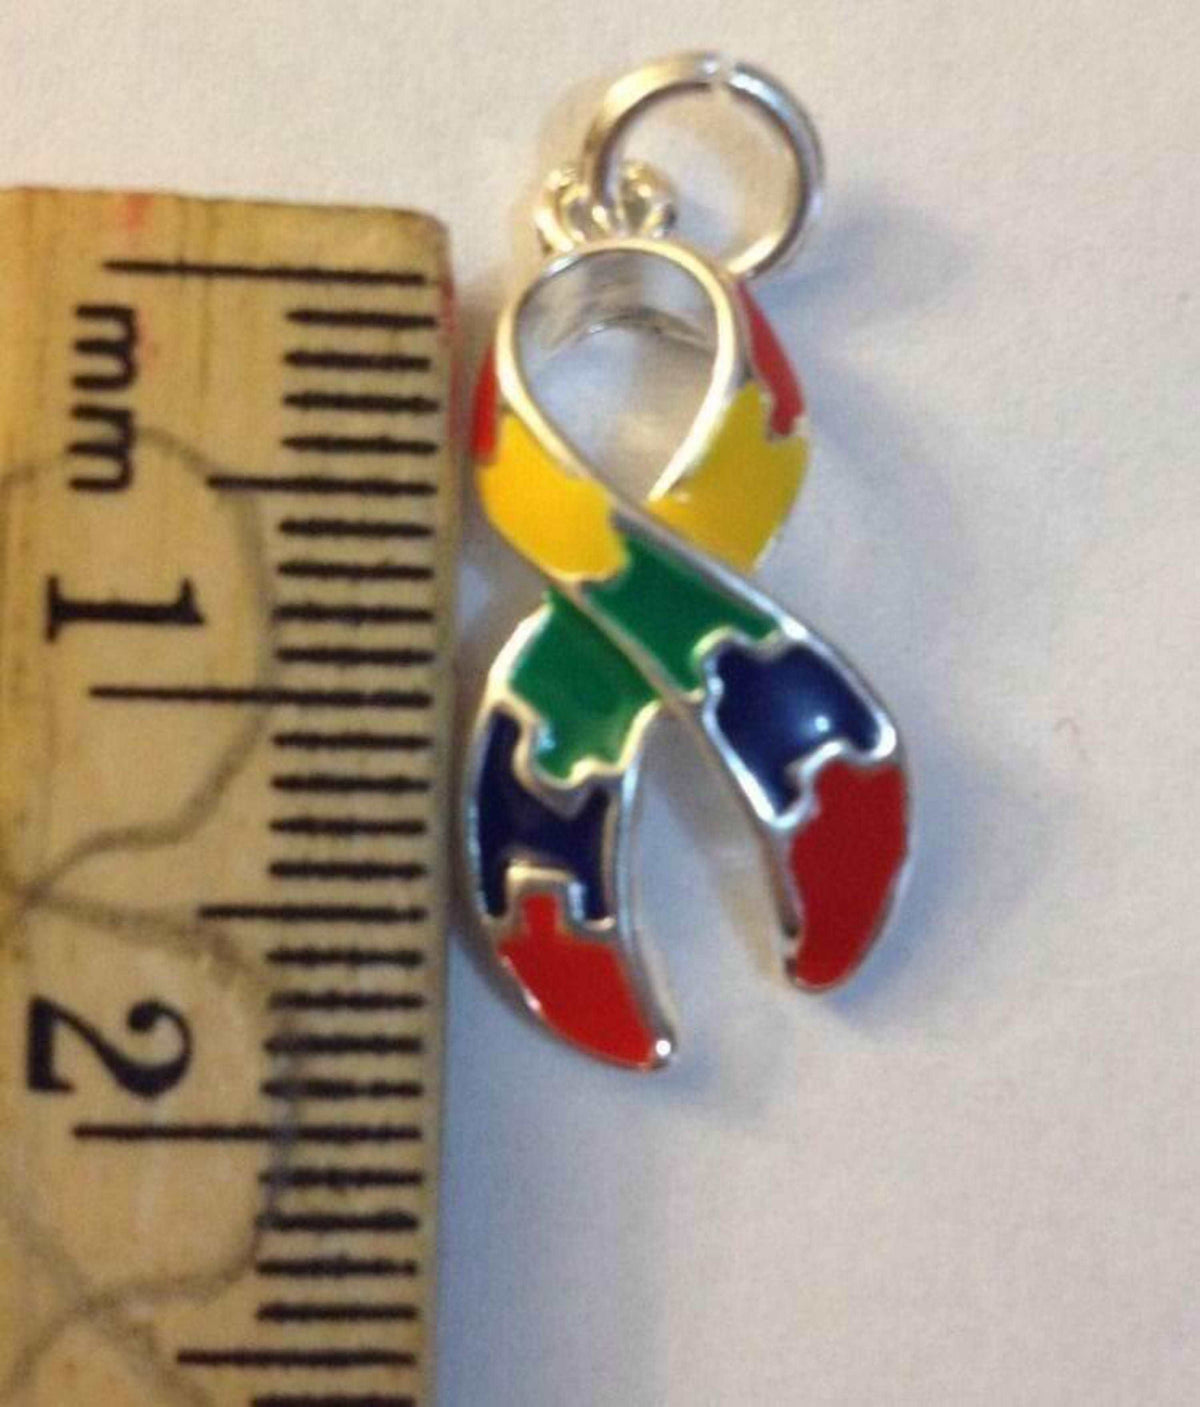 2 Puzzle Charms for Autism Awareness - The House of Awareness